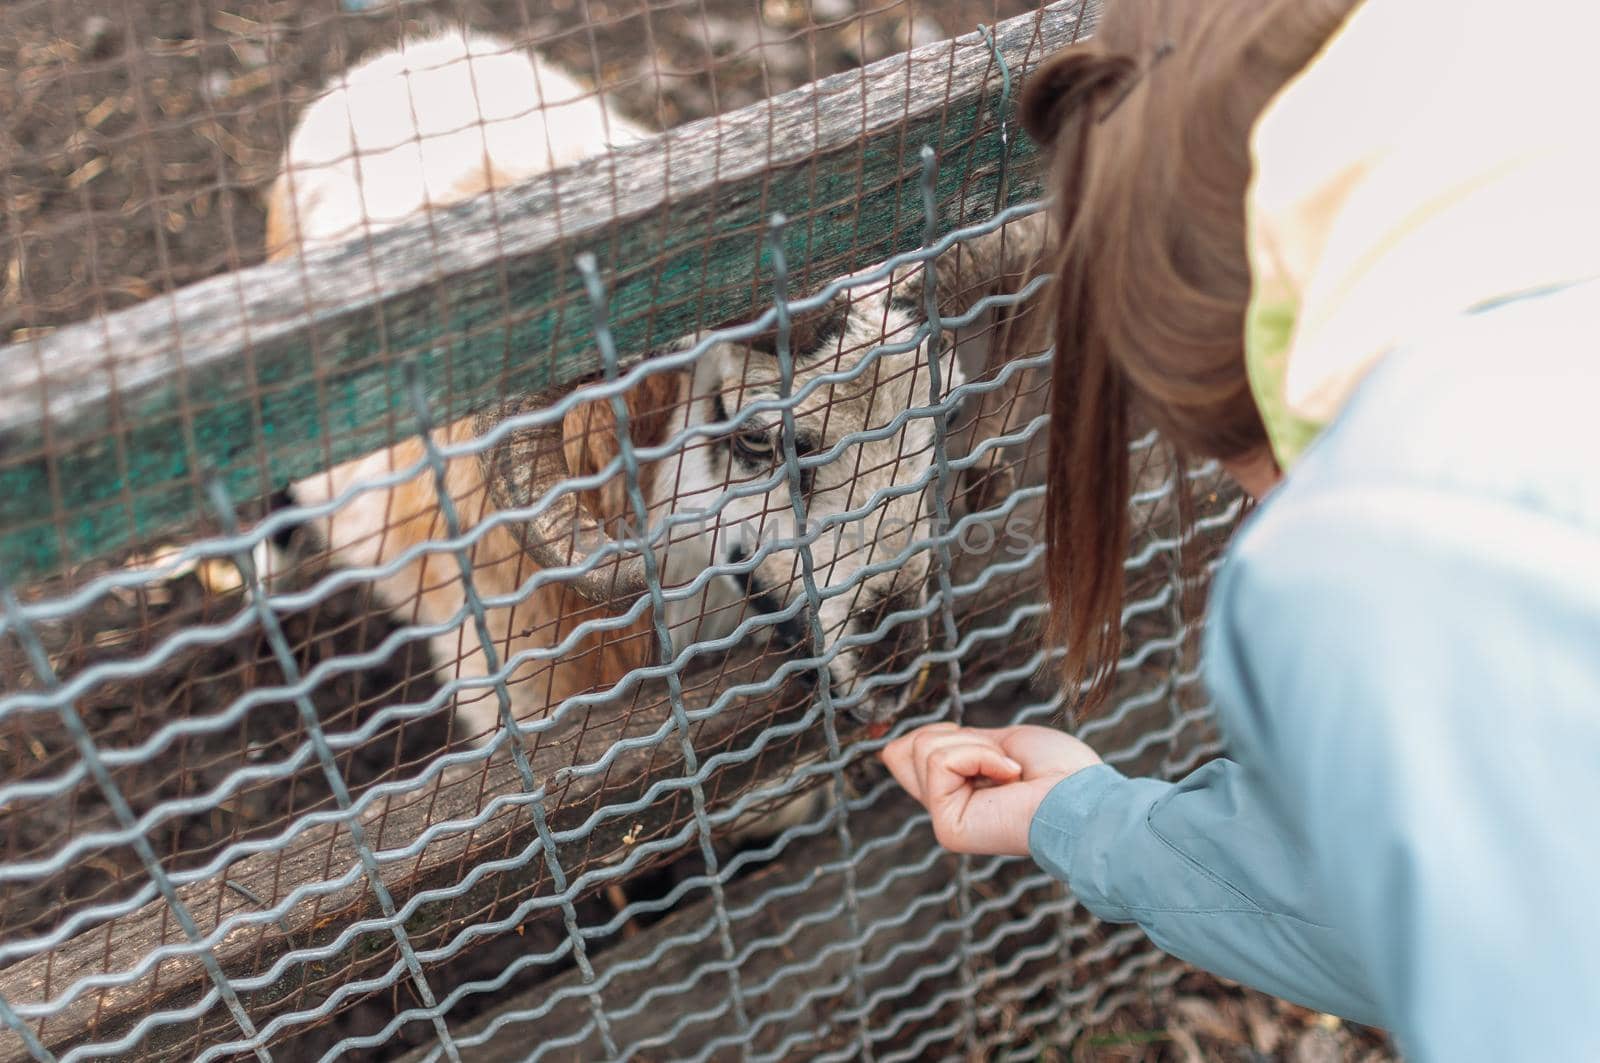 A girl feeds a white sheep with apples through a net in a cage. The mammal is in the zoo. by Alla_Morozova93